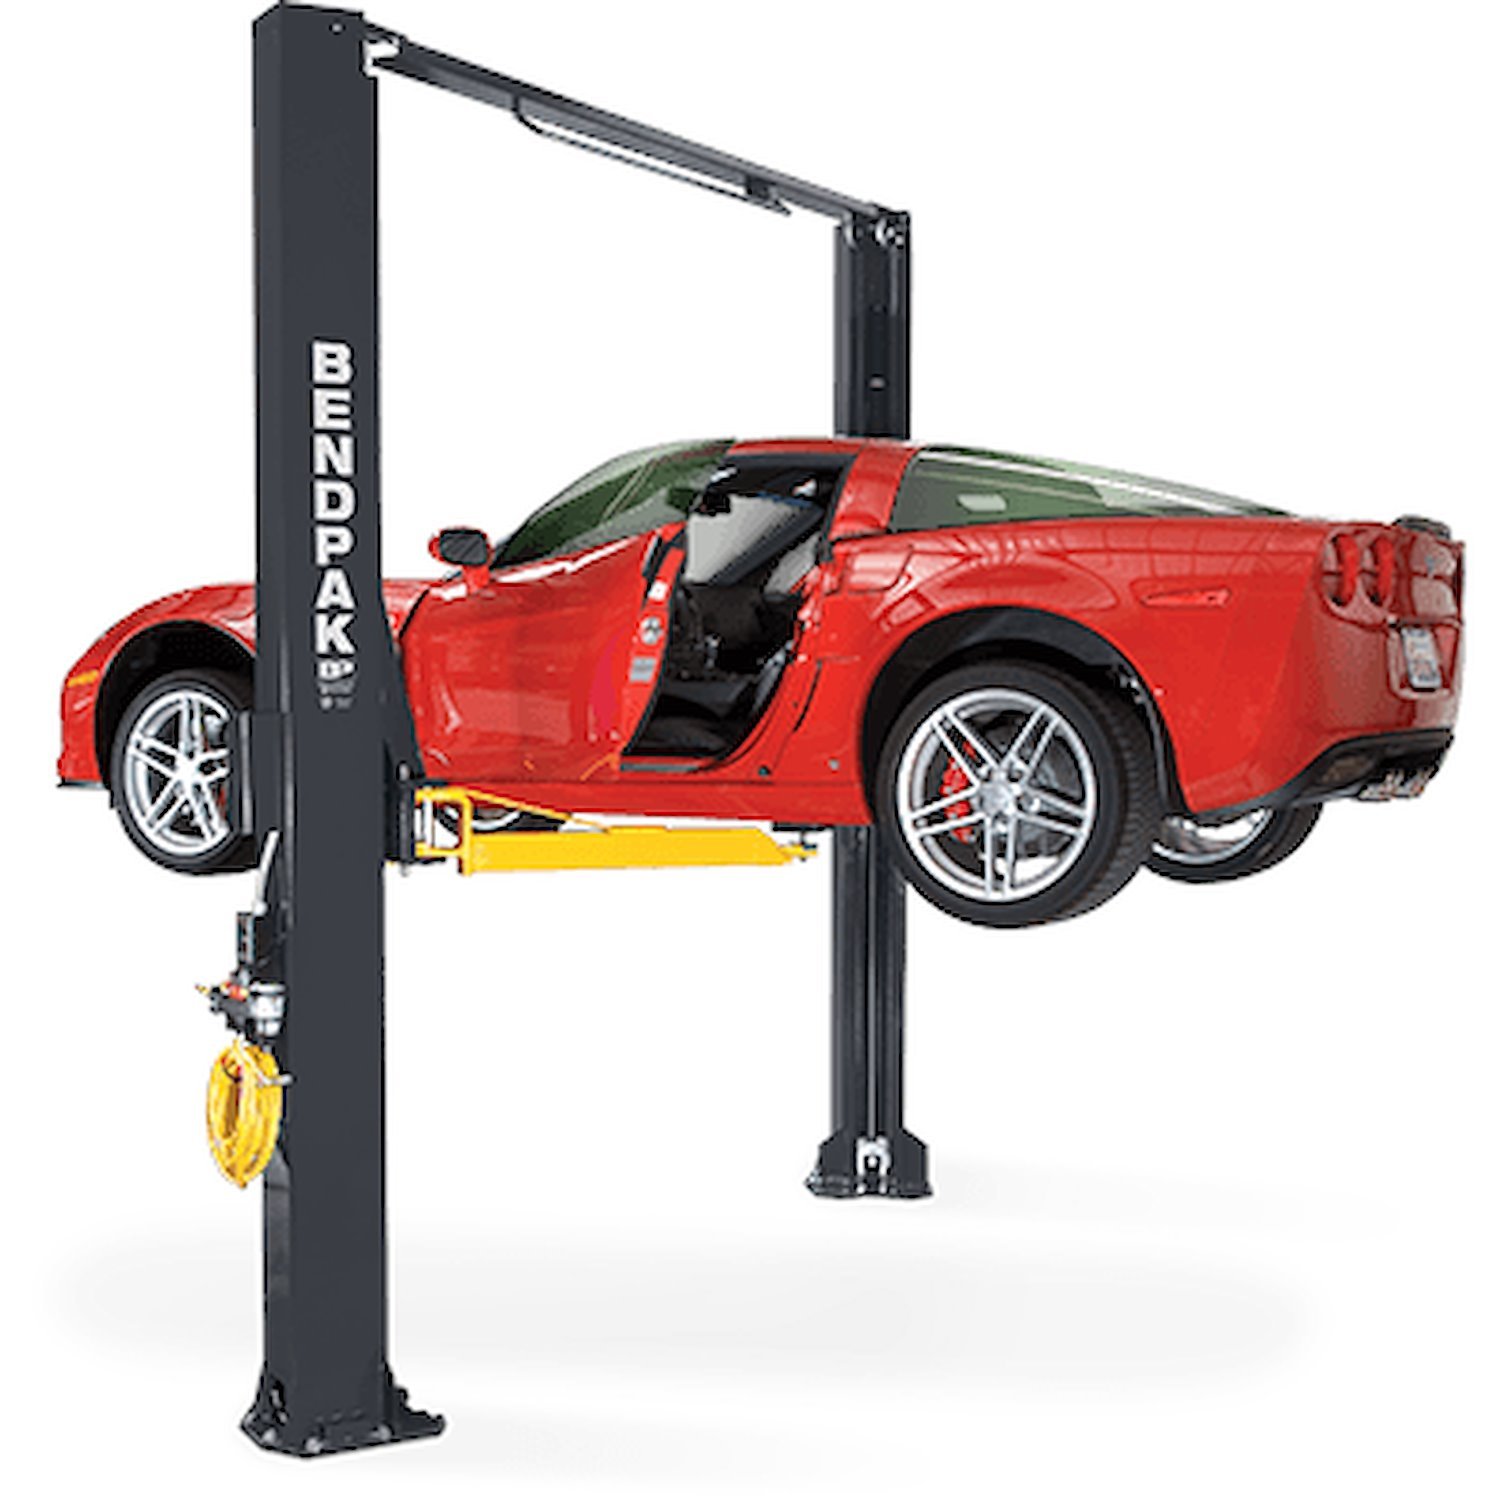 XPR-10AS Two-Post Lift, Adjustable Width, 10,000-lb. Capacity